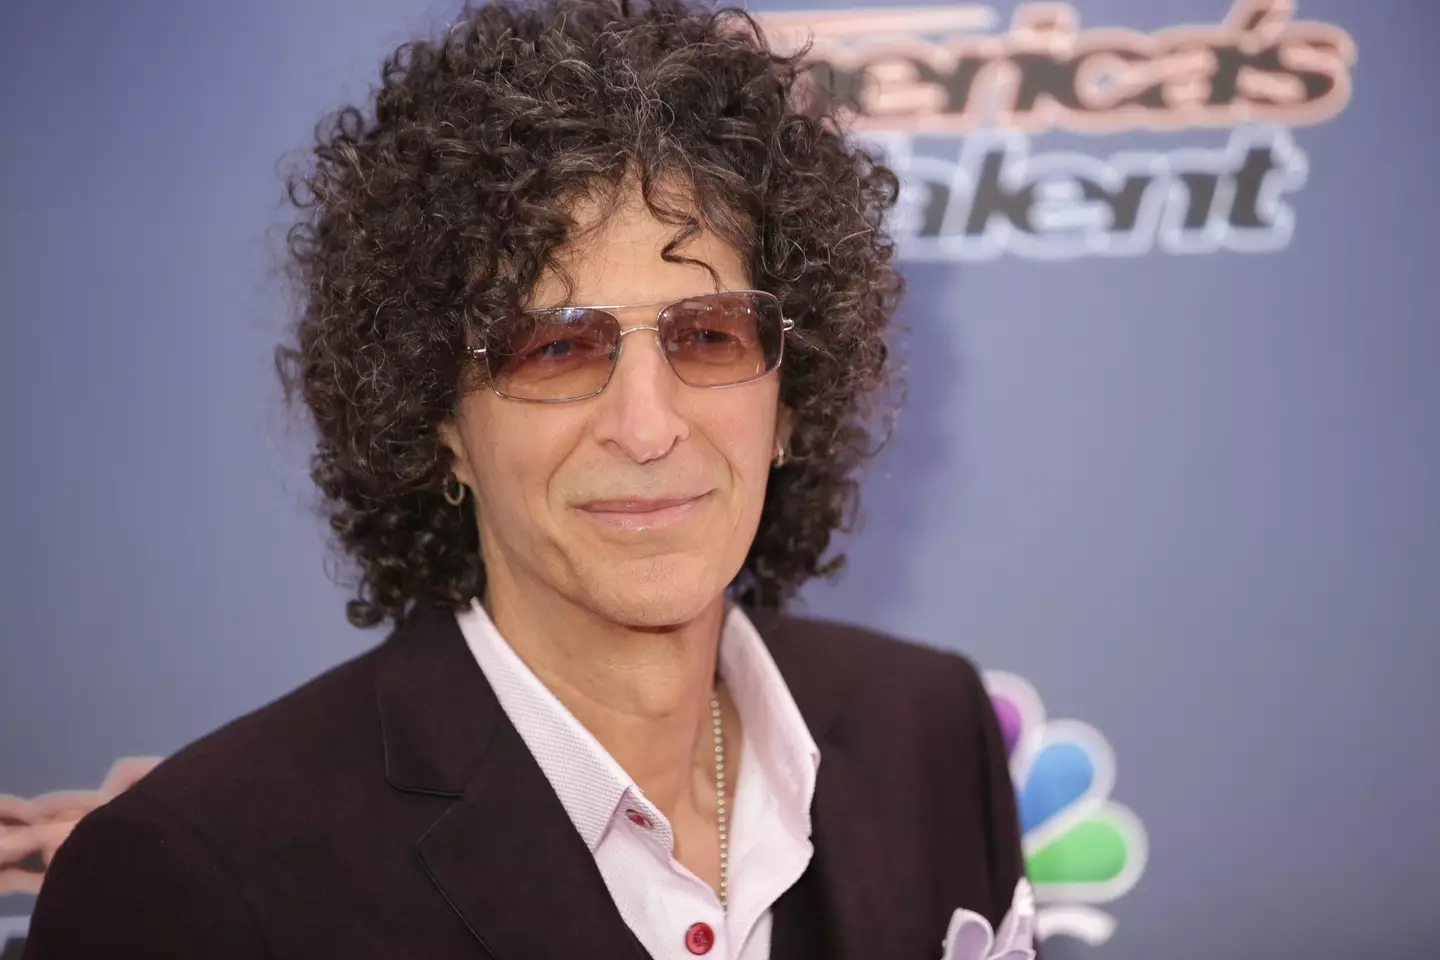 Howard Stern has called out celebrities.